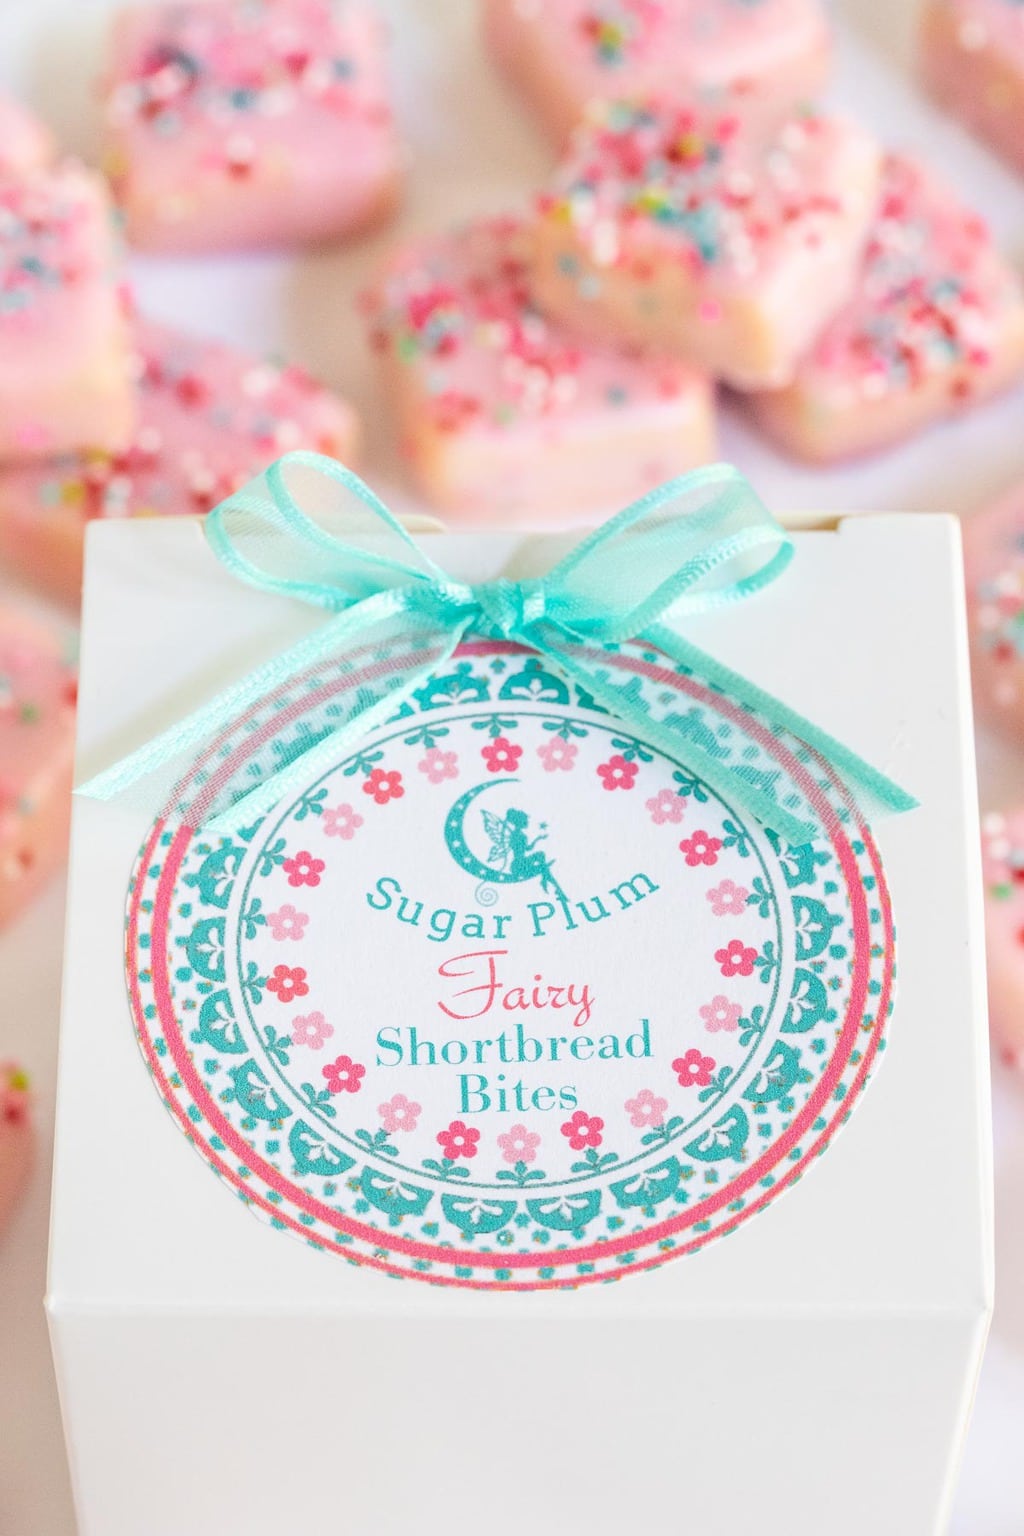 Vertical closeup photo of a Sugar Plum Fairy Shortbread Bites gift label on a box for gift giving.